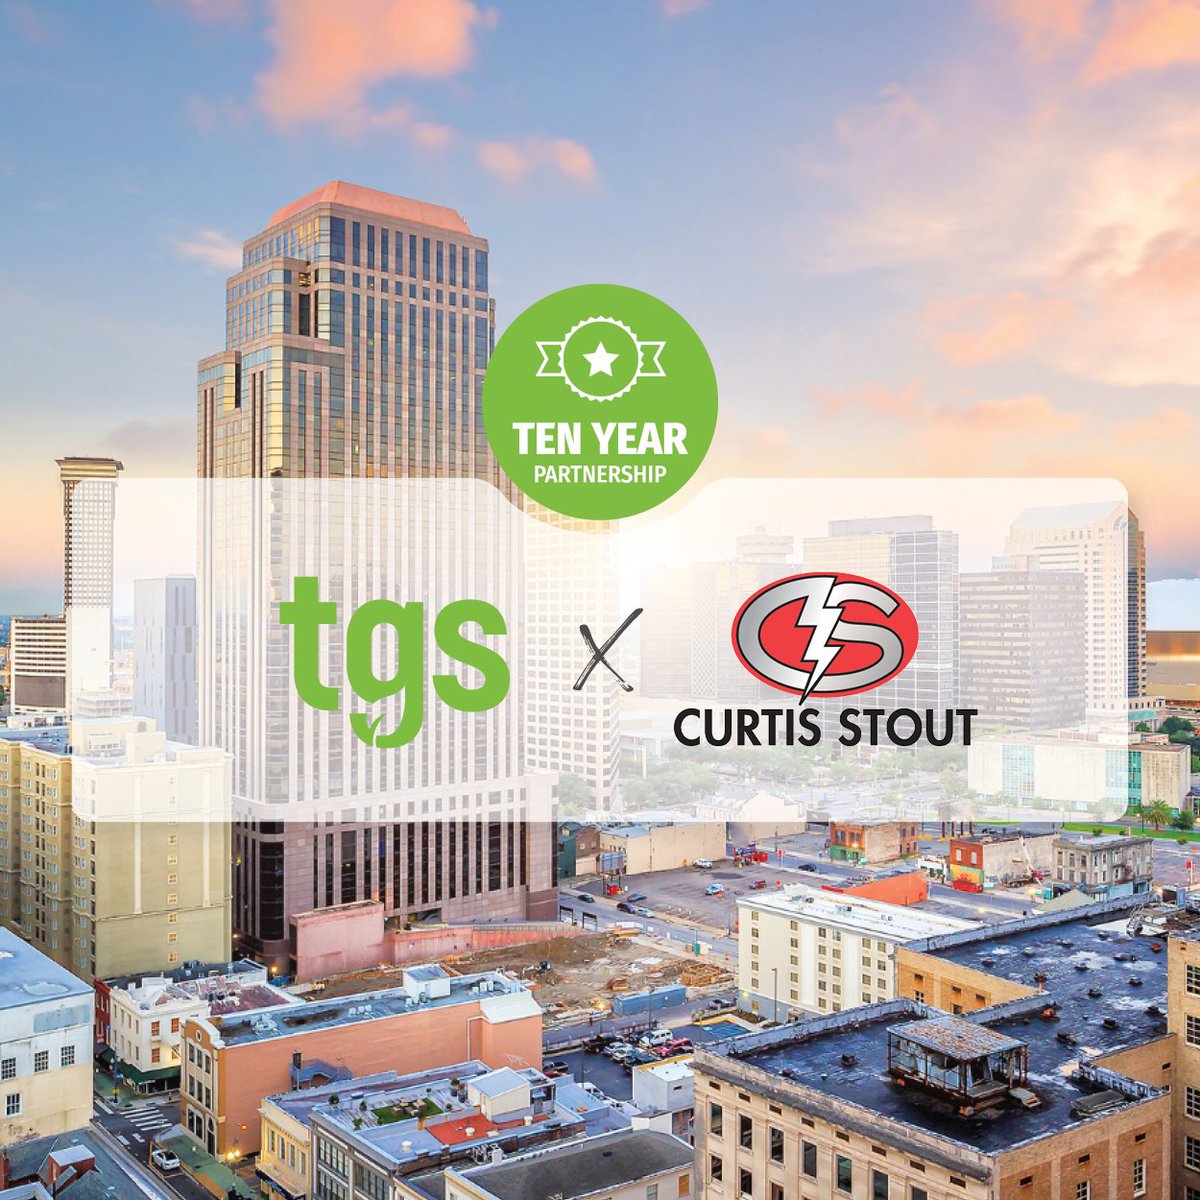 Cheers to a decade of partnership with Curtis Stout, illuminating Louisiana with brilliance! We're grateful for the collaboration and excited to see what's to come. 🎉🌟

#10yearanniversary #partnership #lightingagency #TGS